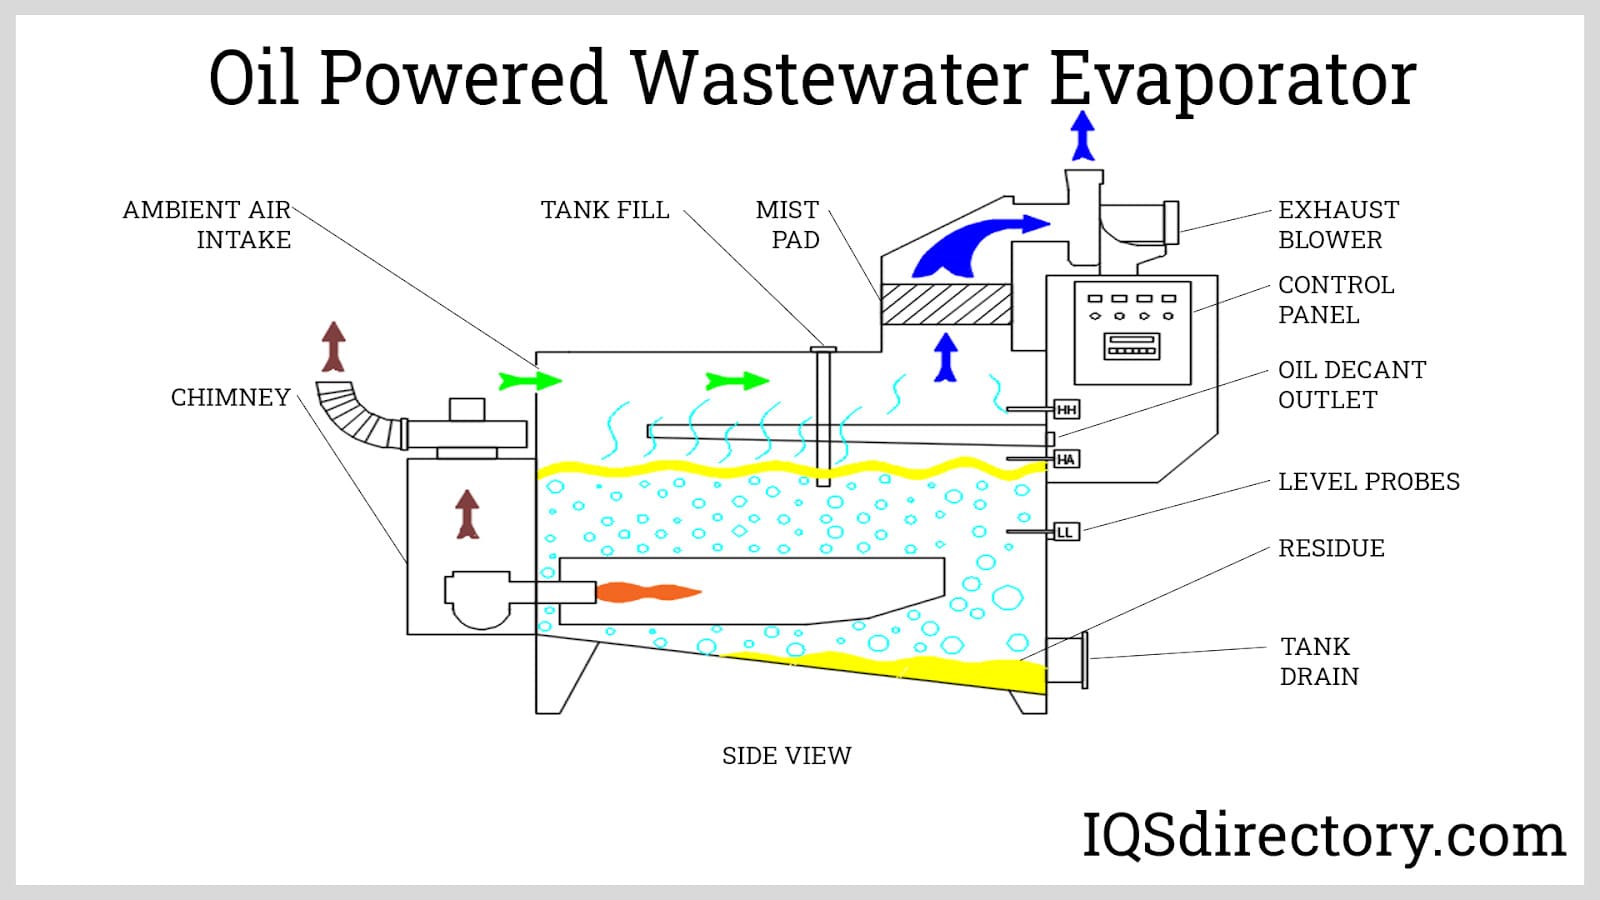 Oil Powered Wastewater Evaporator